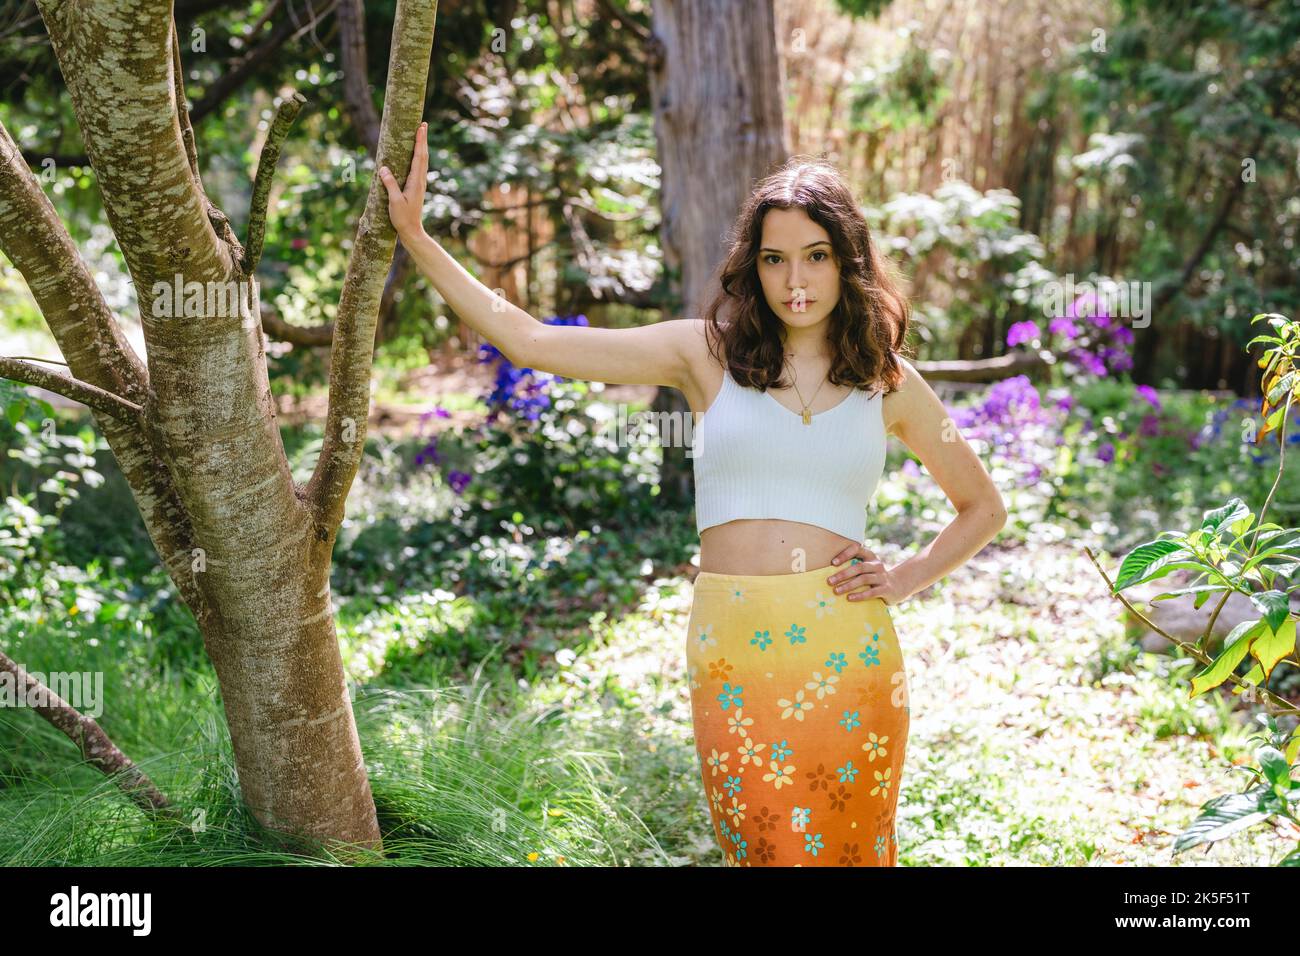 Portrait of a Young Woman in Colorful Orange Floral Print Skirt Standing Surrounded by Flowers in a Botanical Garden Stock Photo